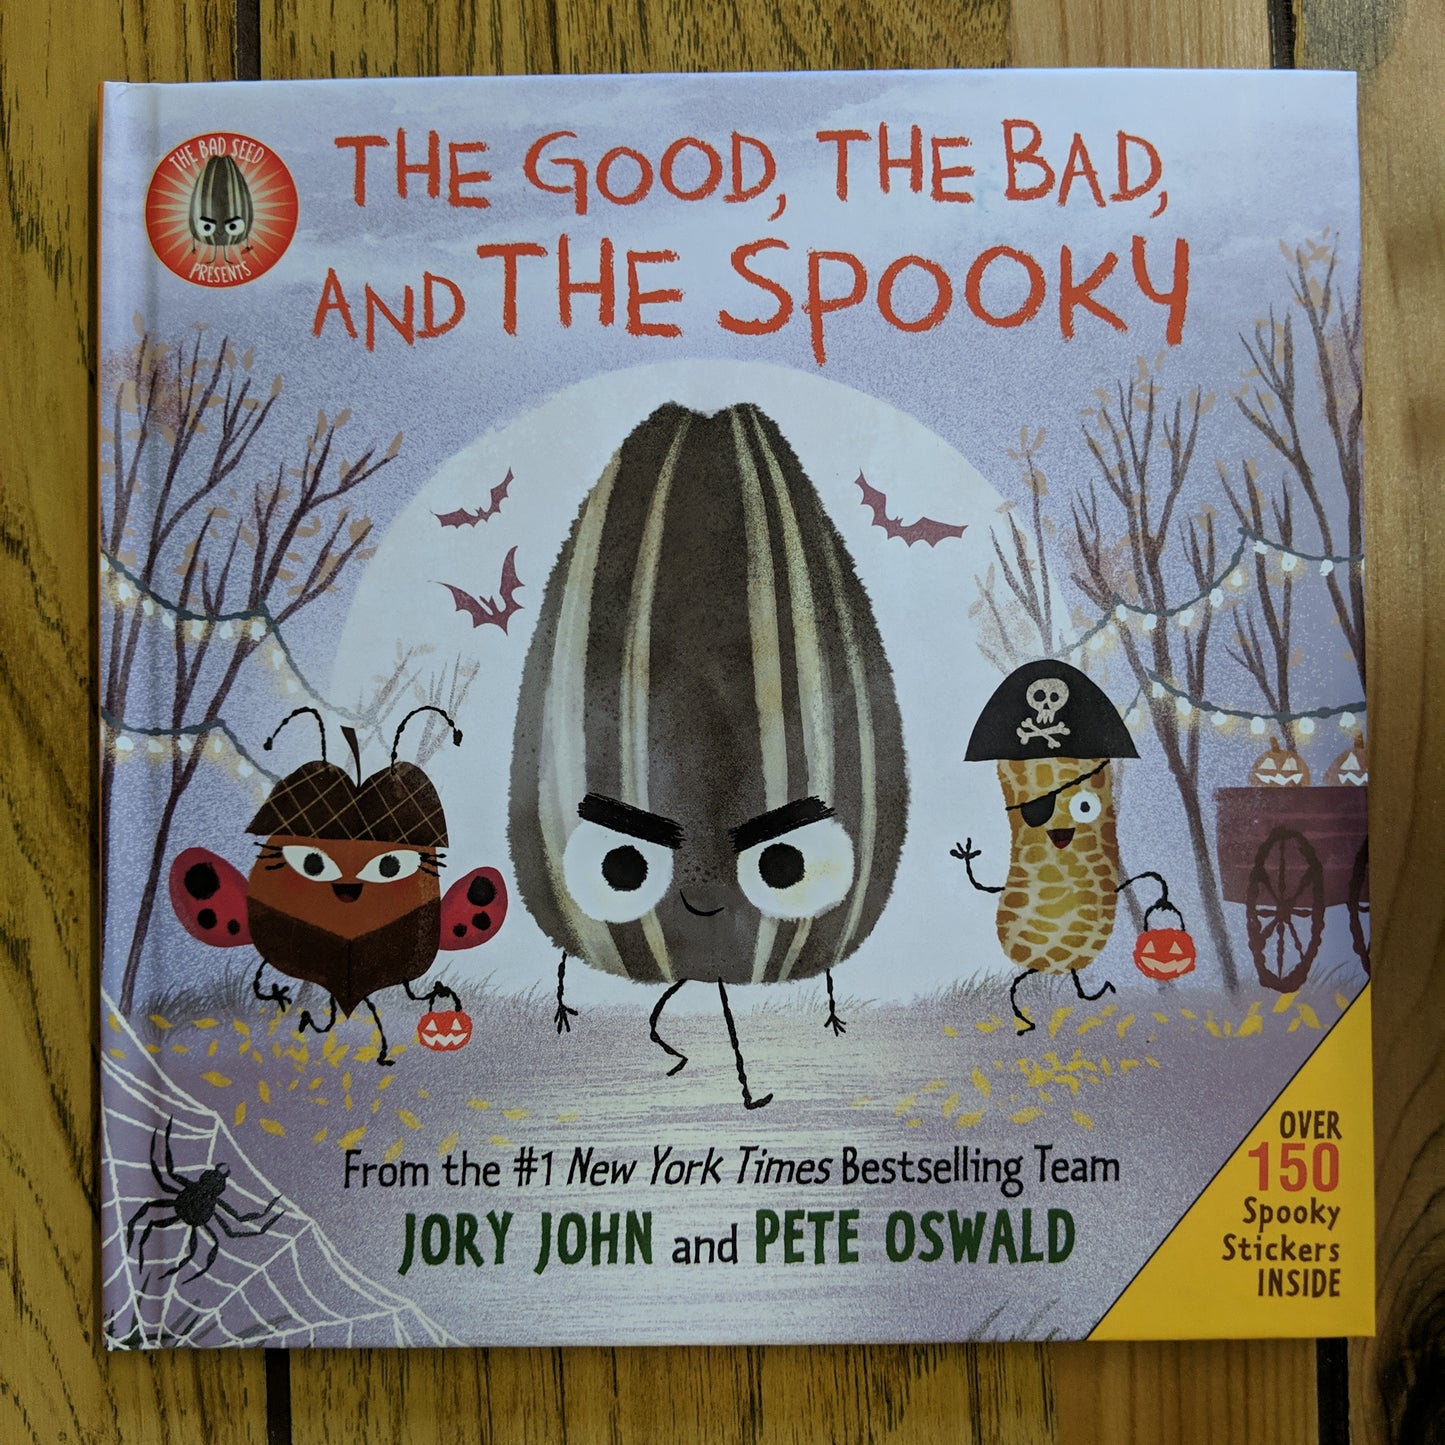 The Good, The Bad, and The Spooky